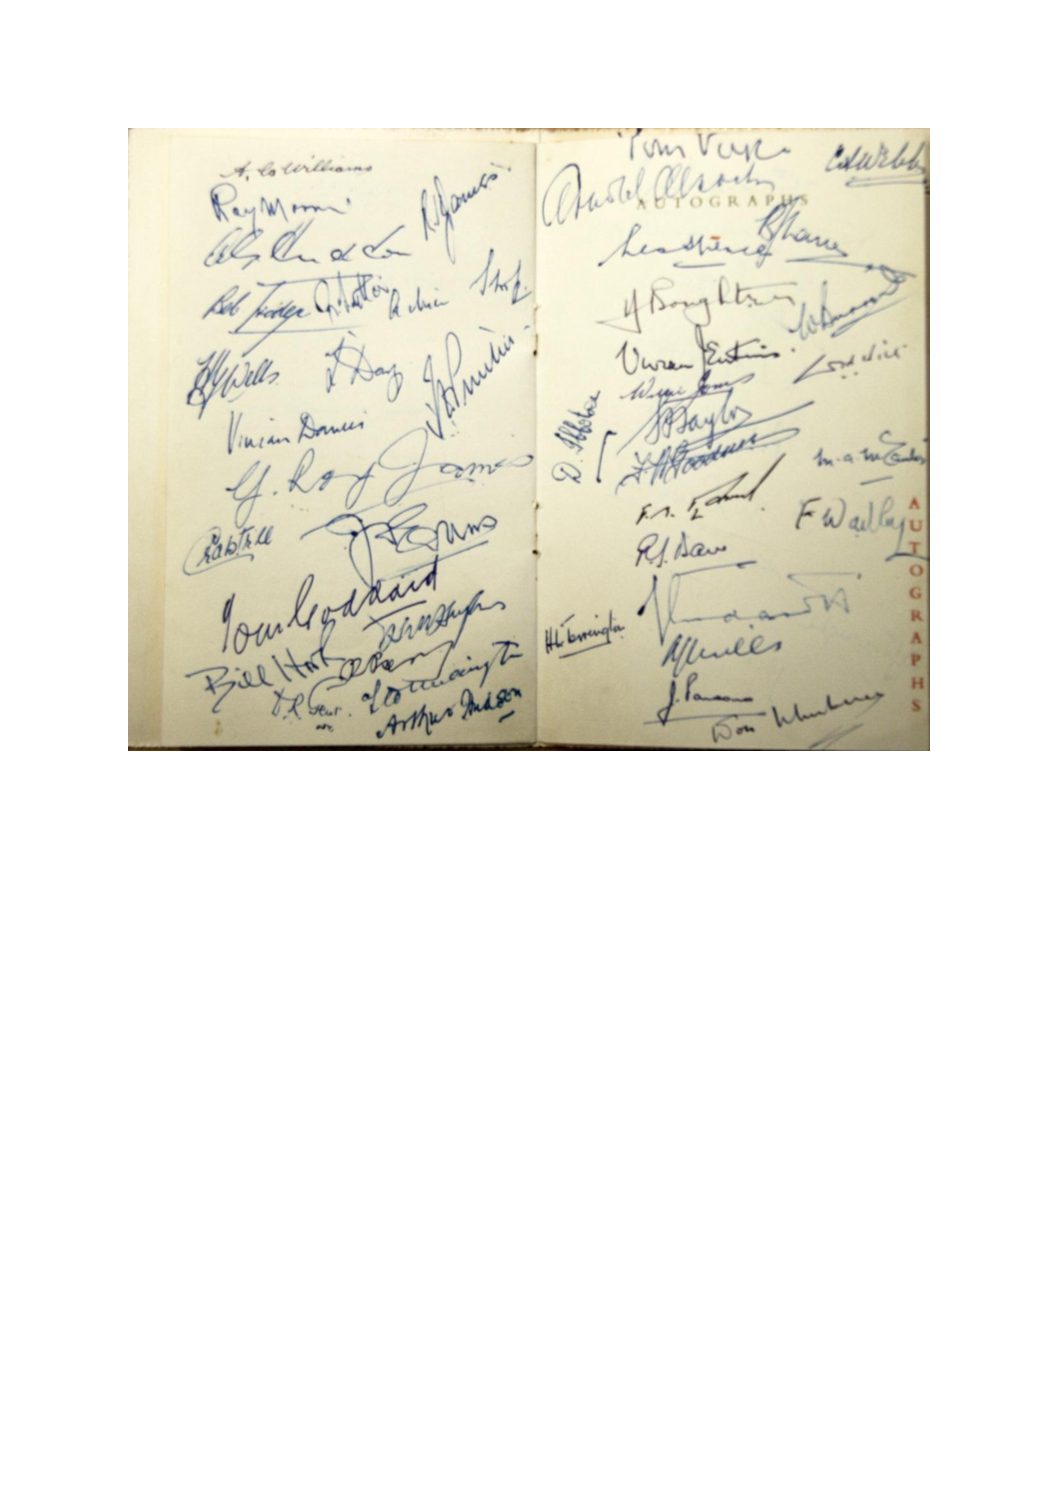 Autographed menu from 1951 Dinner